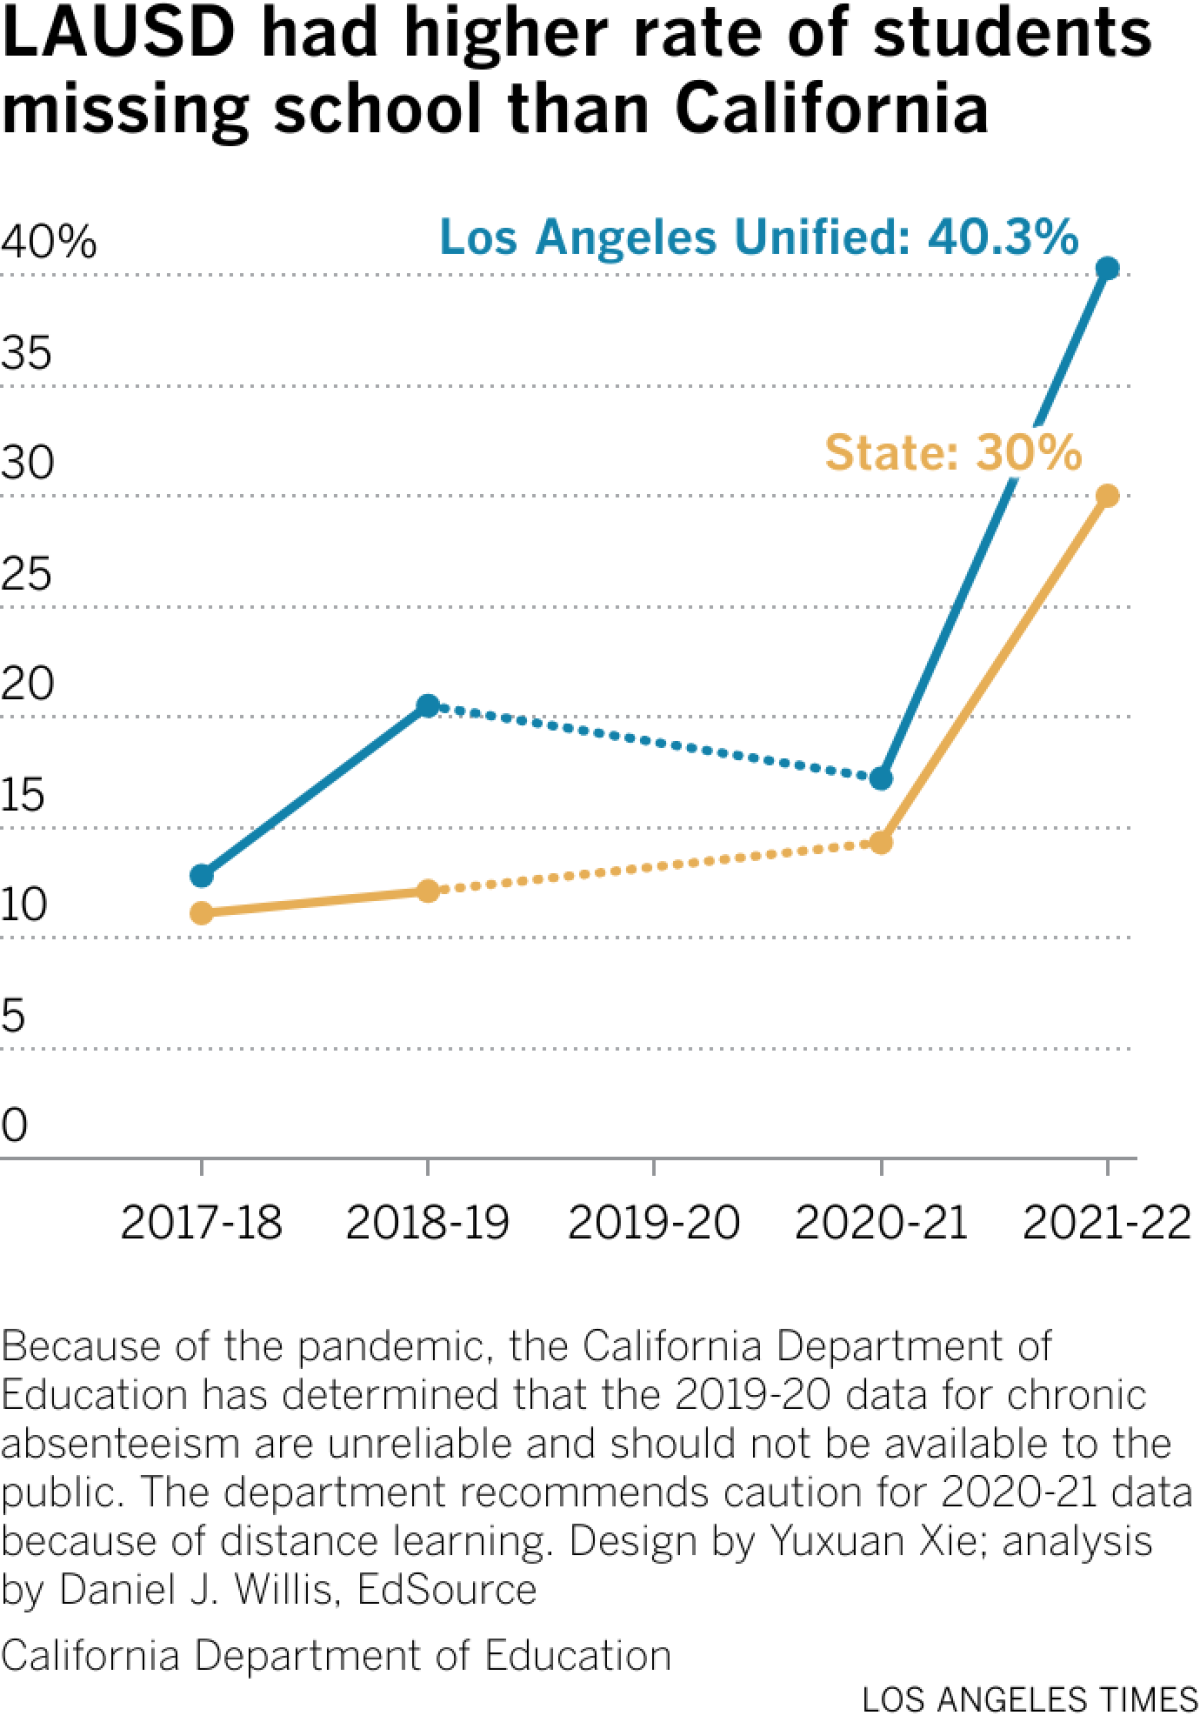 Line chart showing how Los Angeles Unified School District increased much more than the state as a whole in absenteeism. LAUSD was just slightly higher than the state in 2017-18 at 12.8% and jumped to 40.3% in 2021-22. Statewide the rate was 11.1% in 2017-18 and 30% in 2021-22